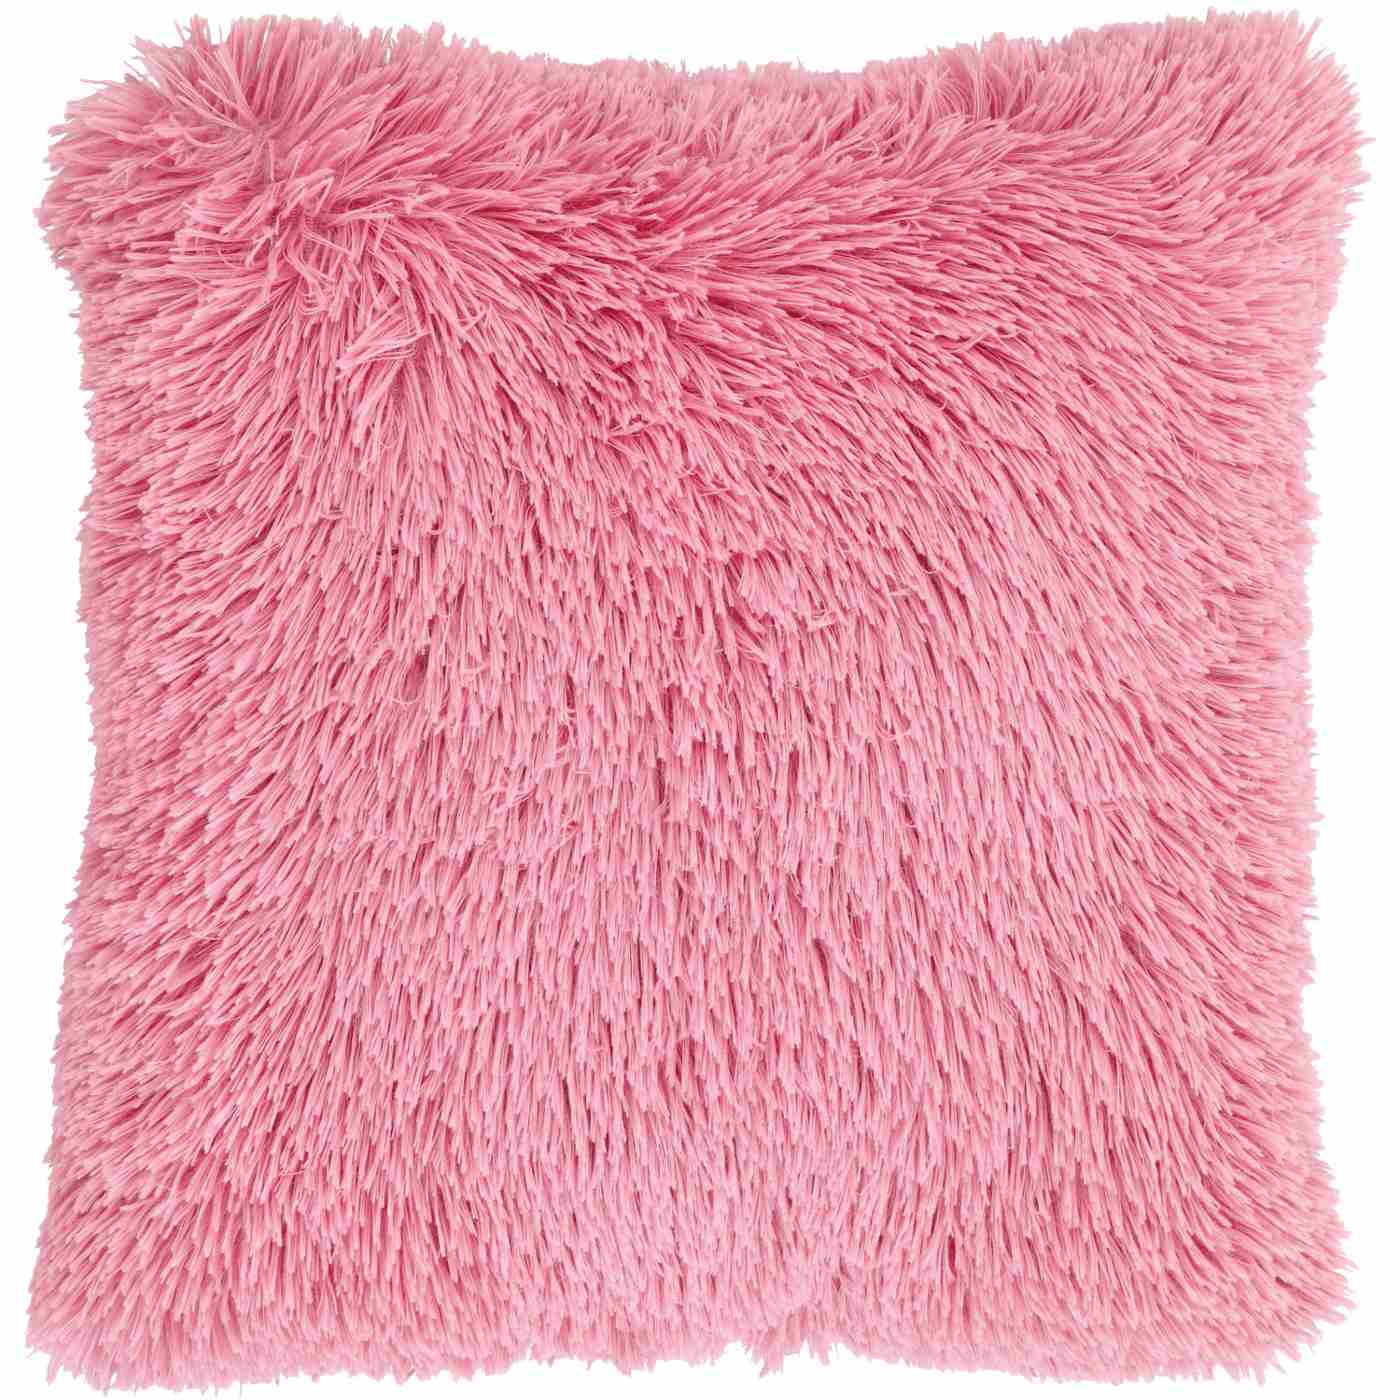 Destination Holiday Faux Fur Pillow - Pink; image 1 of 3